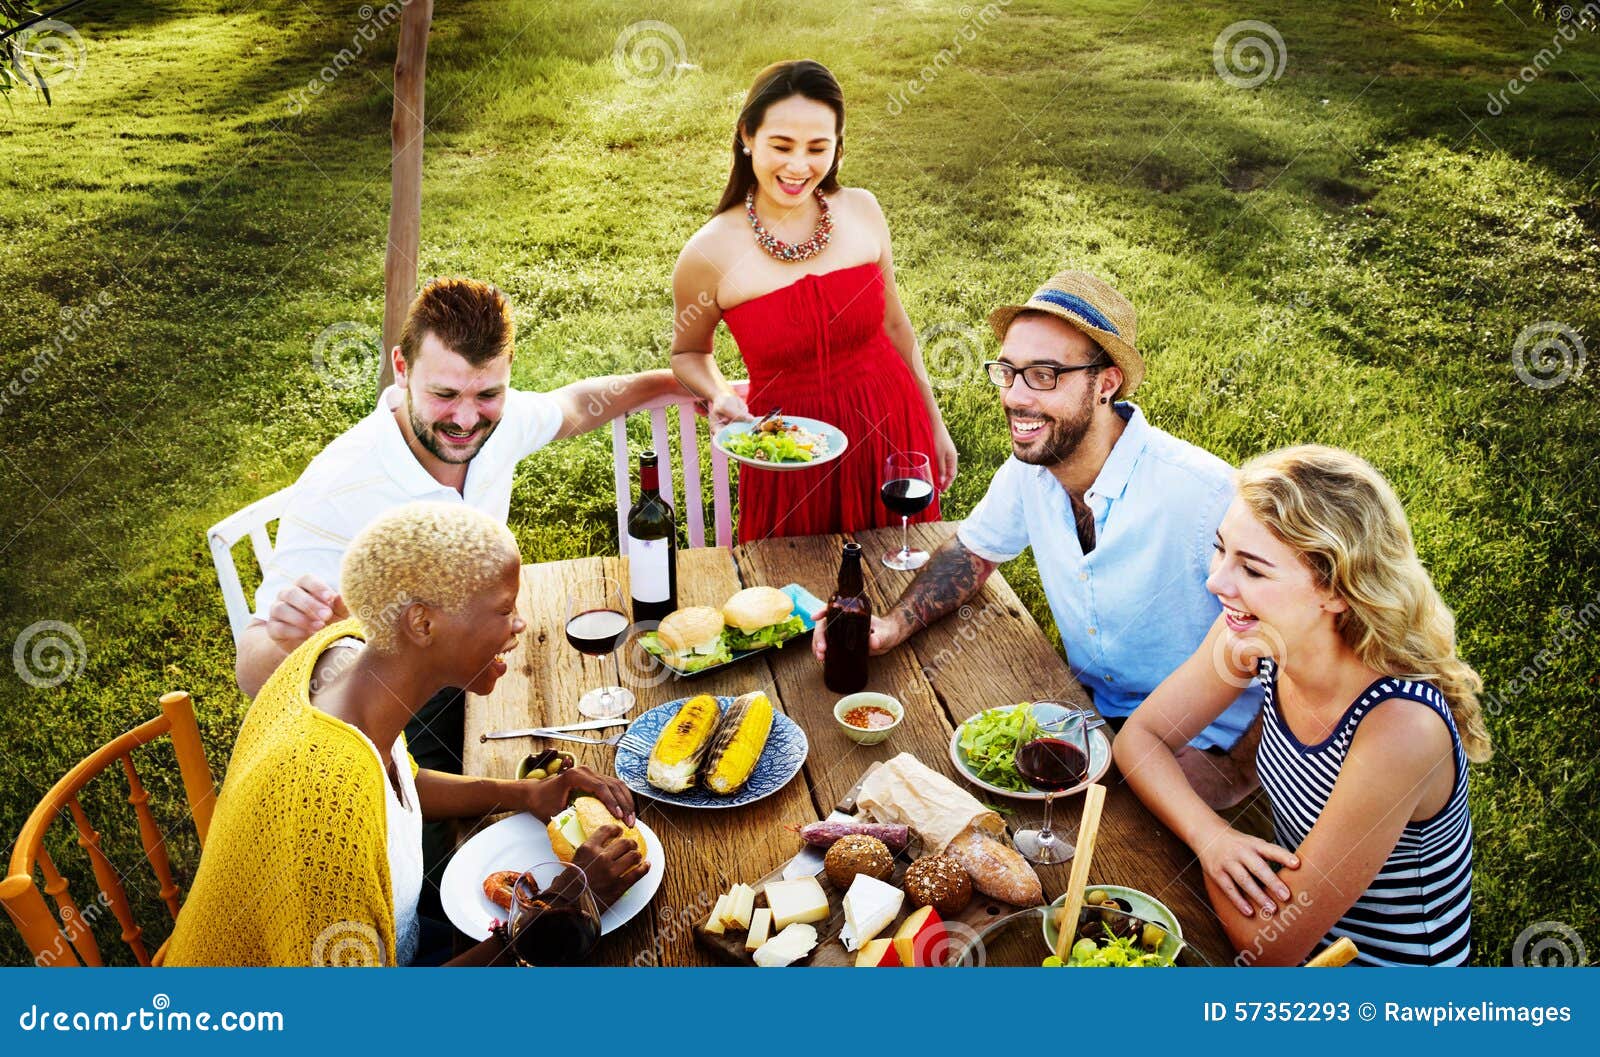 diverse people party togetherness friendship concept